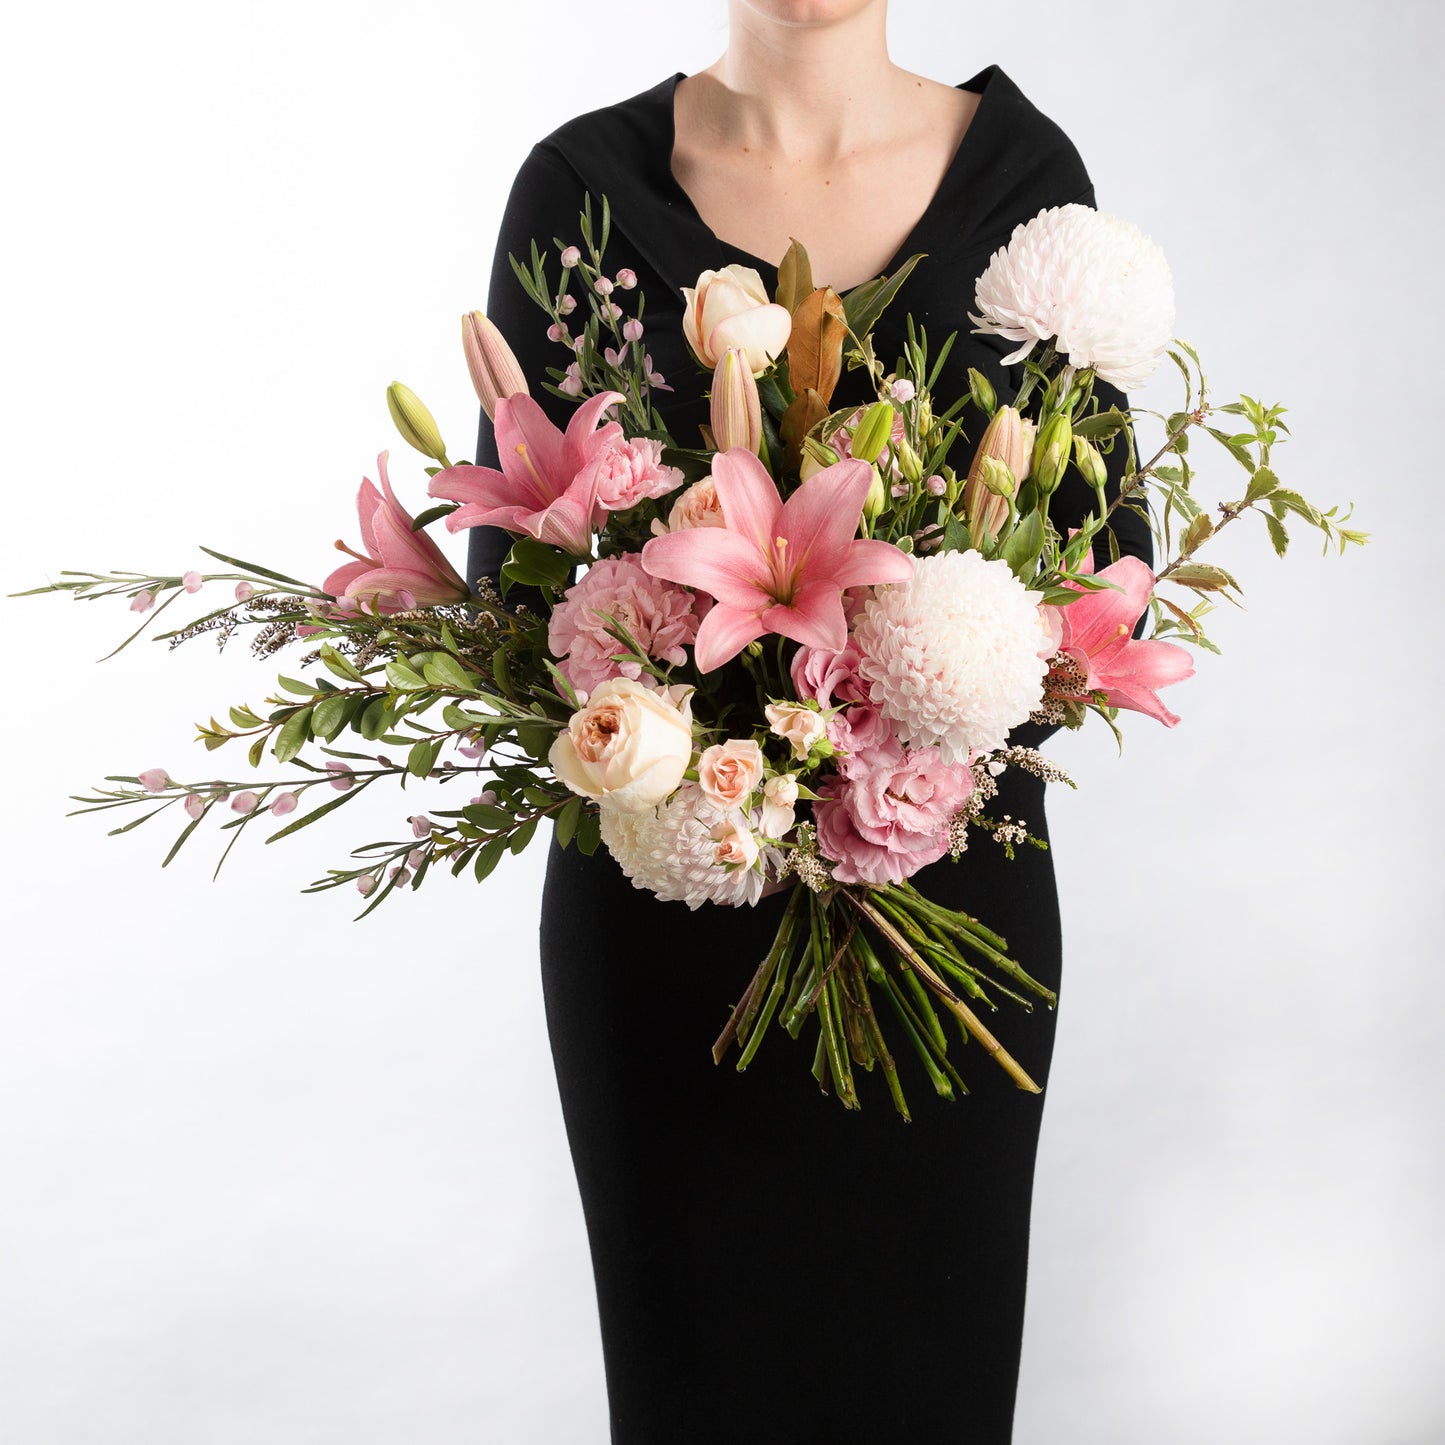 Woman wearing a black dress, holding a bouquet of mixed flowers including, tiger lilies, roses and disbud chrysanthemums in soft pinks.